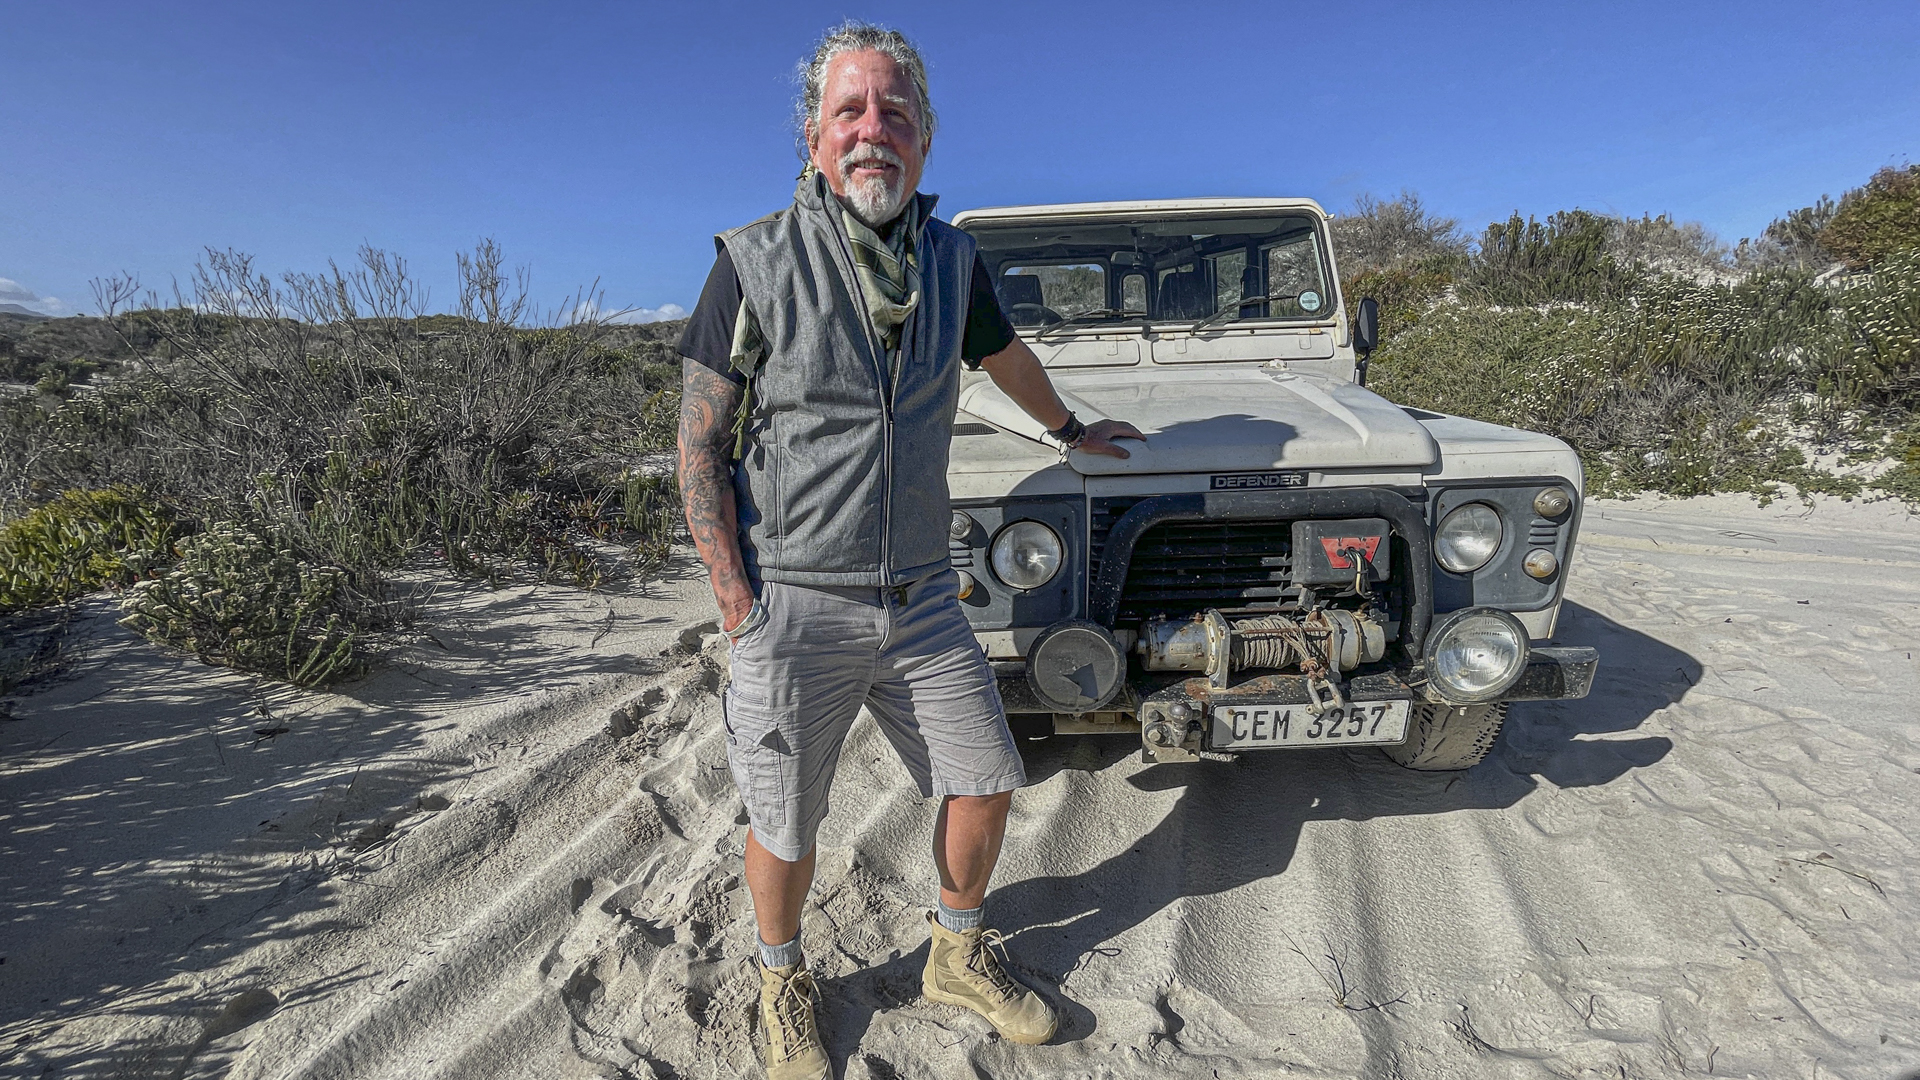 Exploring the dunes in South Africa in the Landy